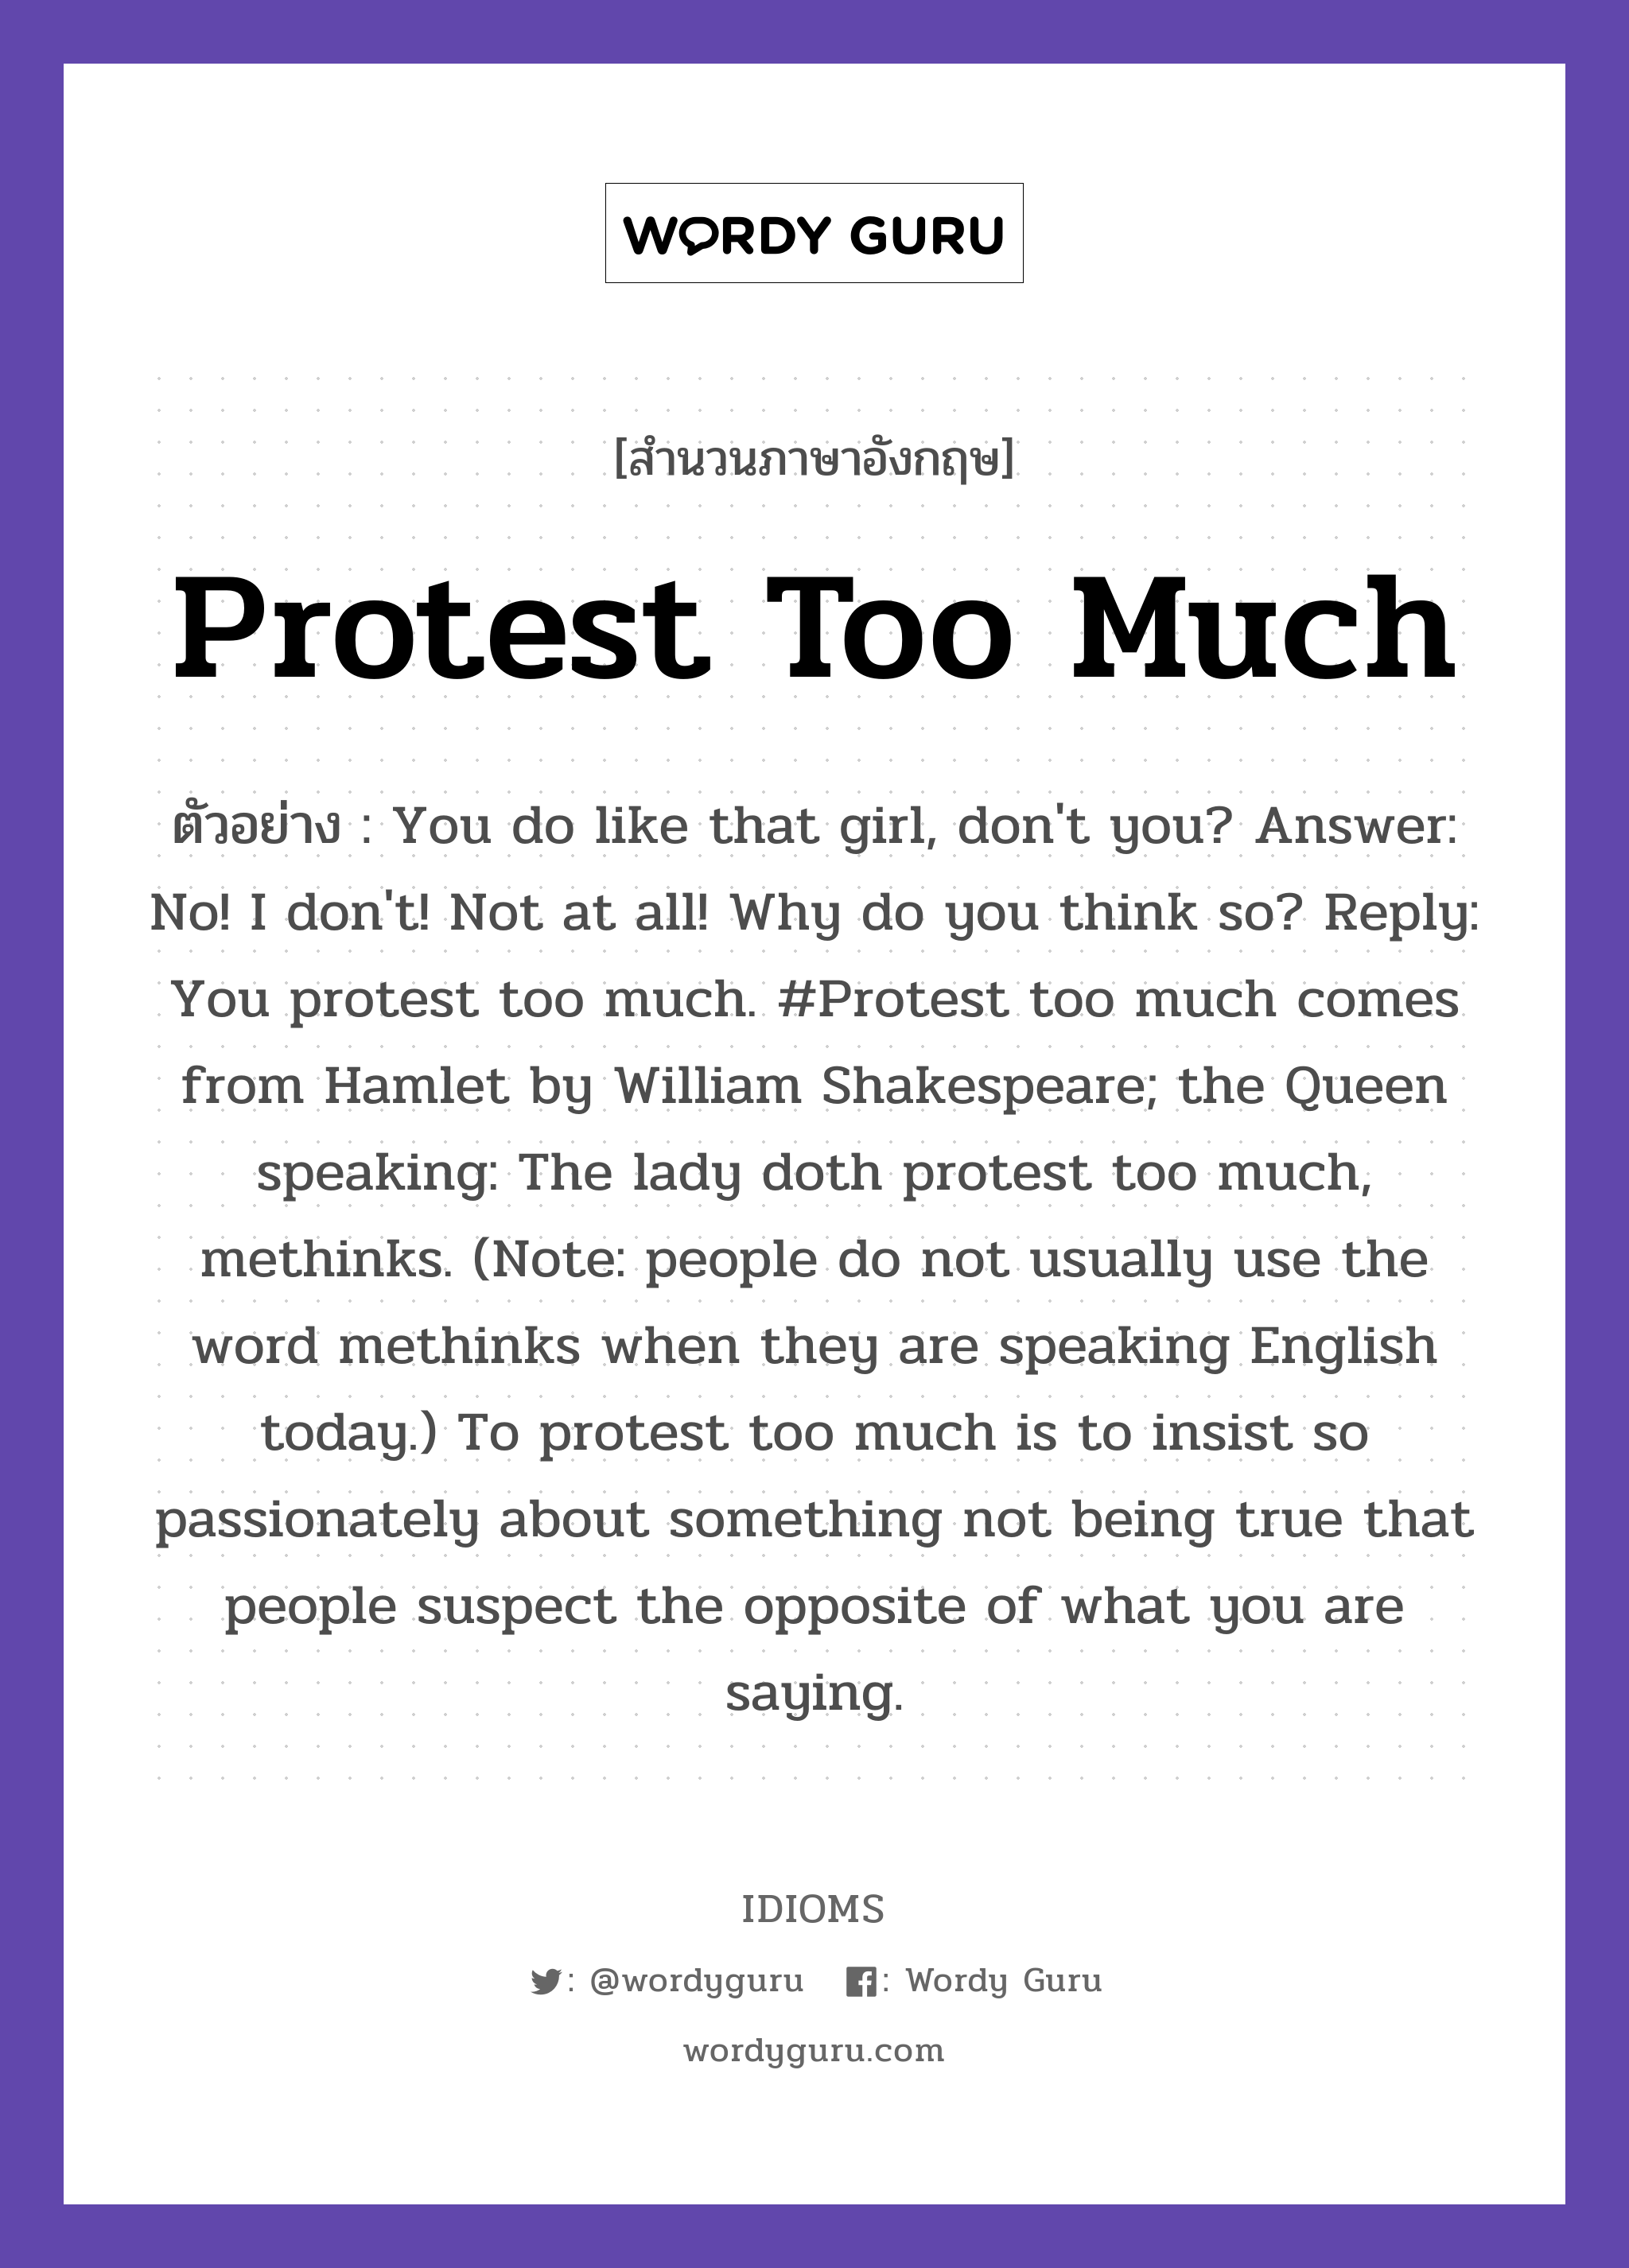 Protest Too Much แปลว่า?, สำนวนภาษาอังกฤษ Protest Too Much ตัวอย่าง You do like that girl, don't you? Answer: No! I don't! Not at all! Why do you think so? Reply: You protest too much. #Protest too much comes from Hamlet by William Shakespeare; the Queen speaking: The lady doth protest too much, methinks. (Note: people do not usually use the word methinks when they are speaking English today.) To protest too much is to insist so passionately about something not being true that people suspect the opposite of what you are saying.